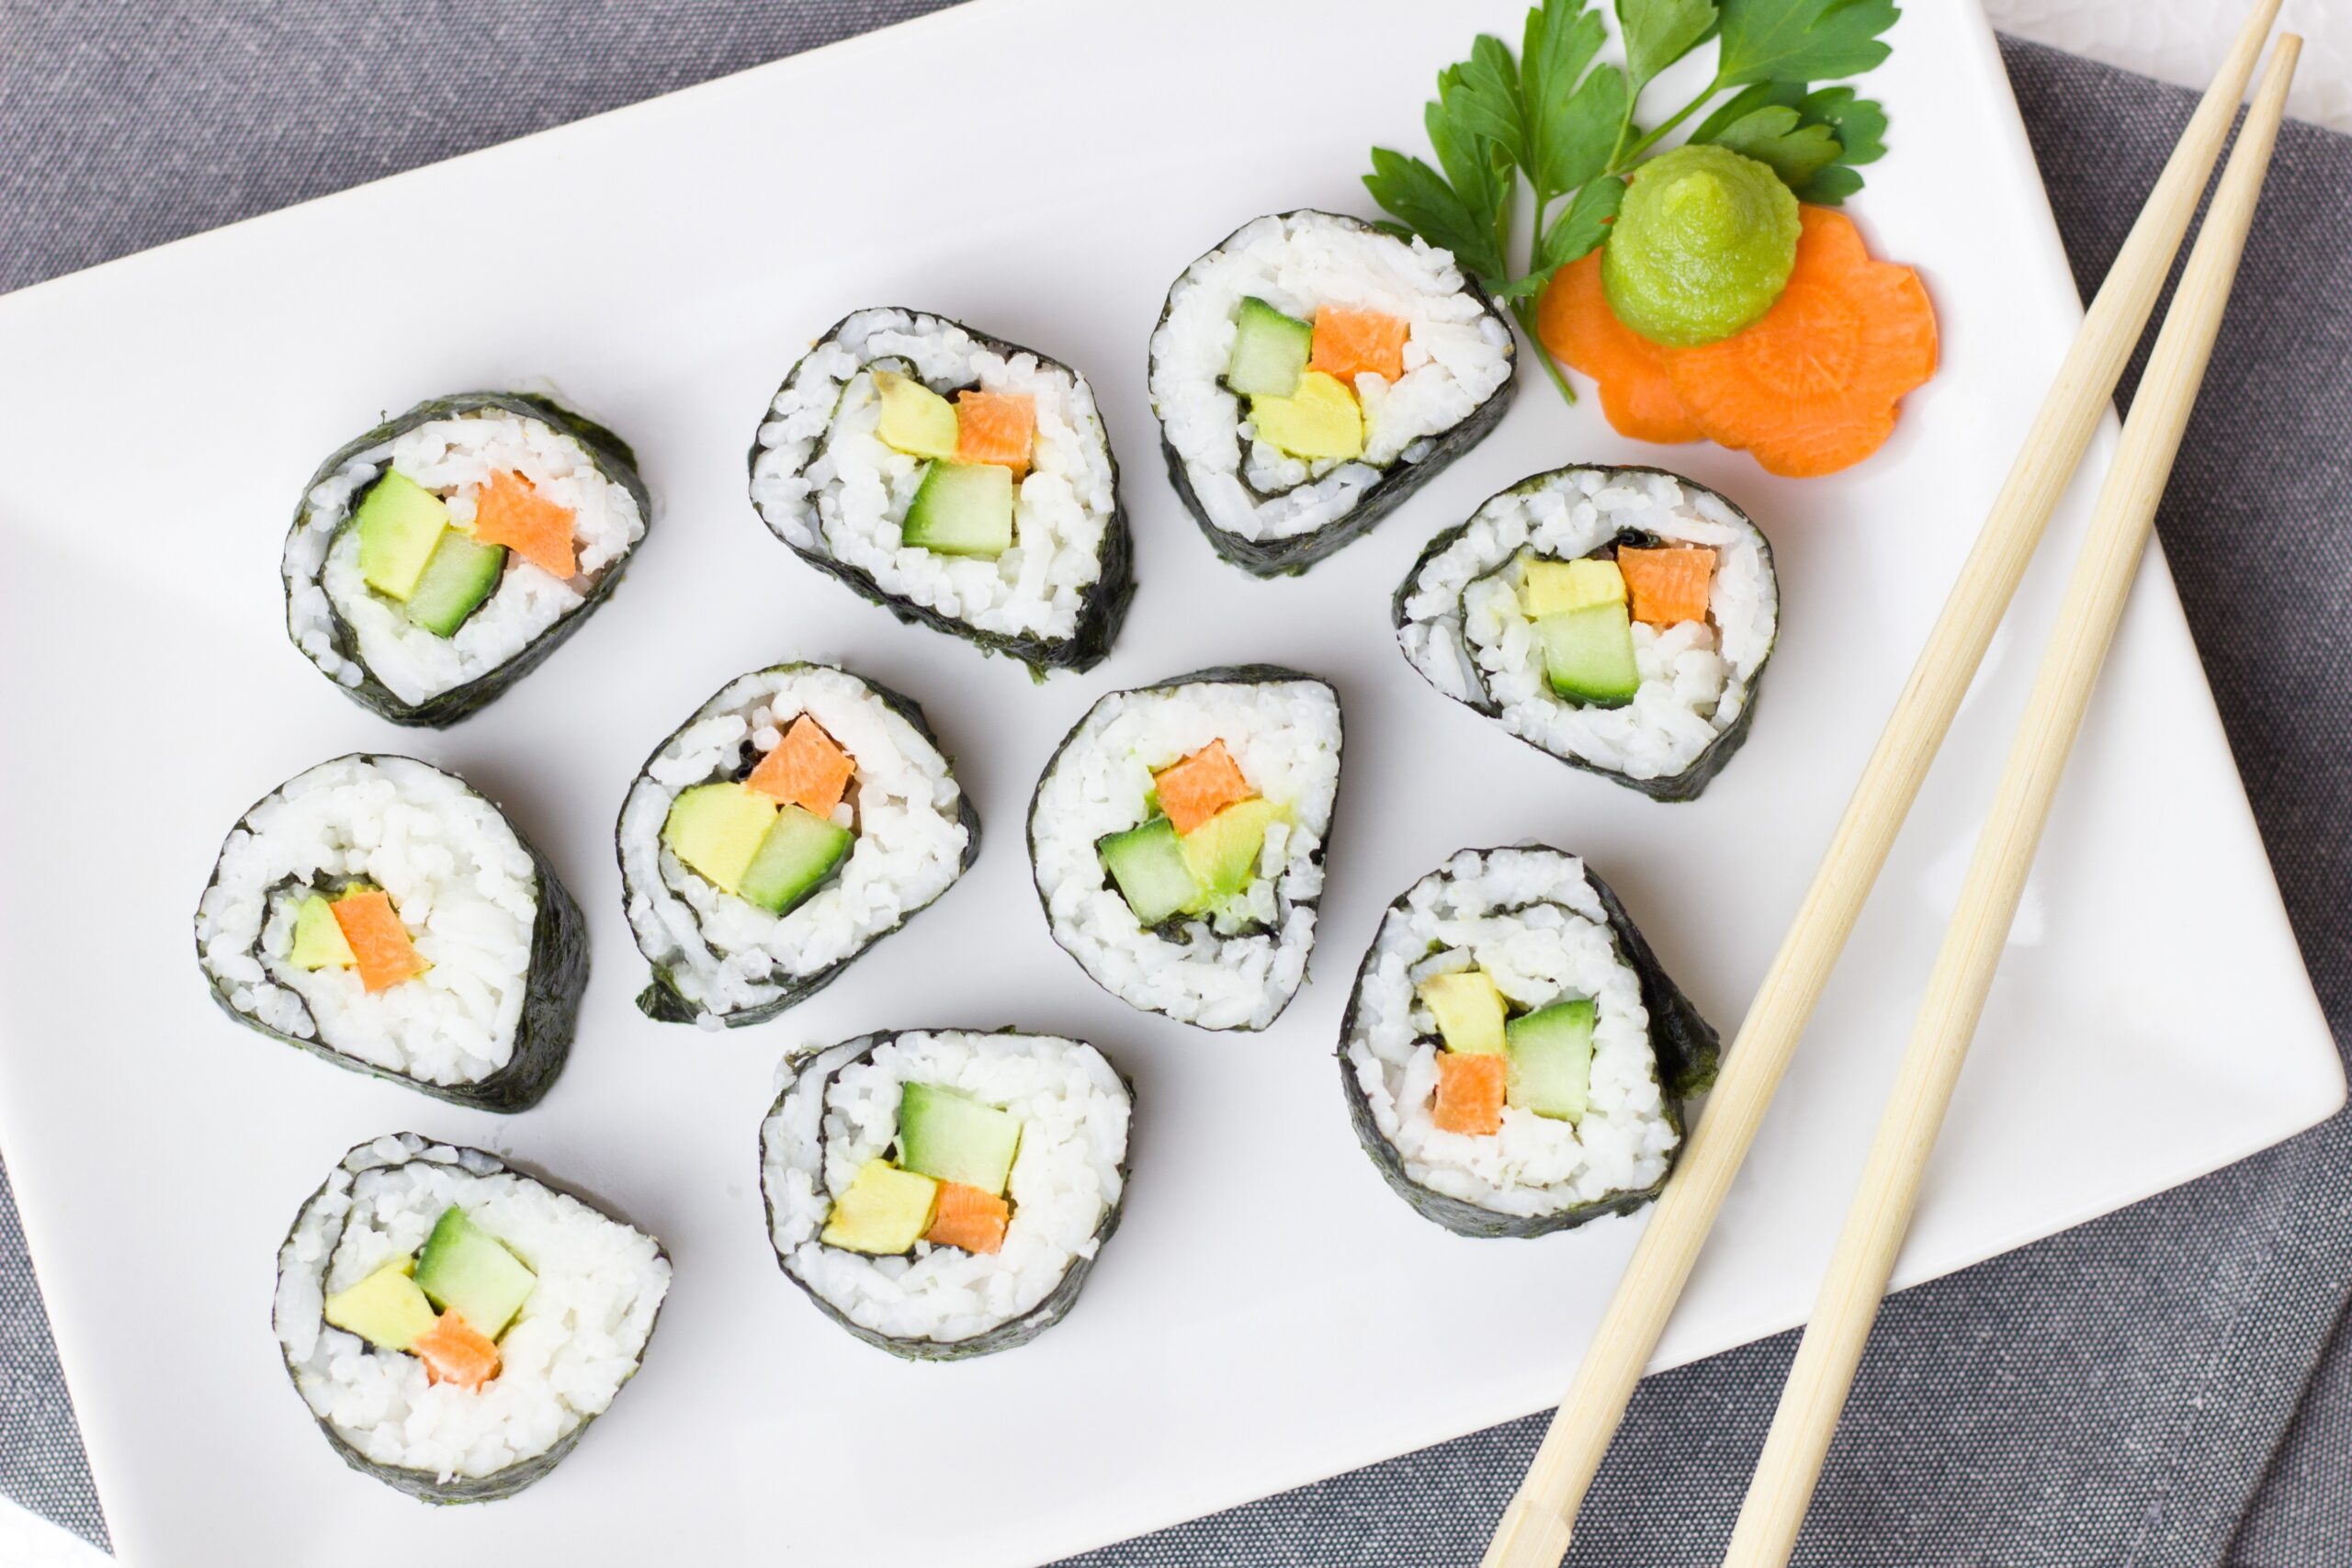 Sushi Maker Machine: The Different Types and Benefits